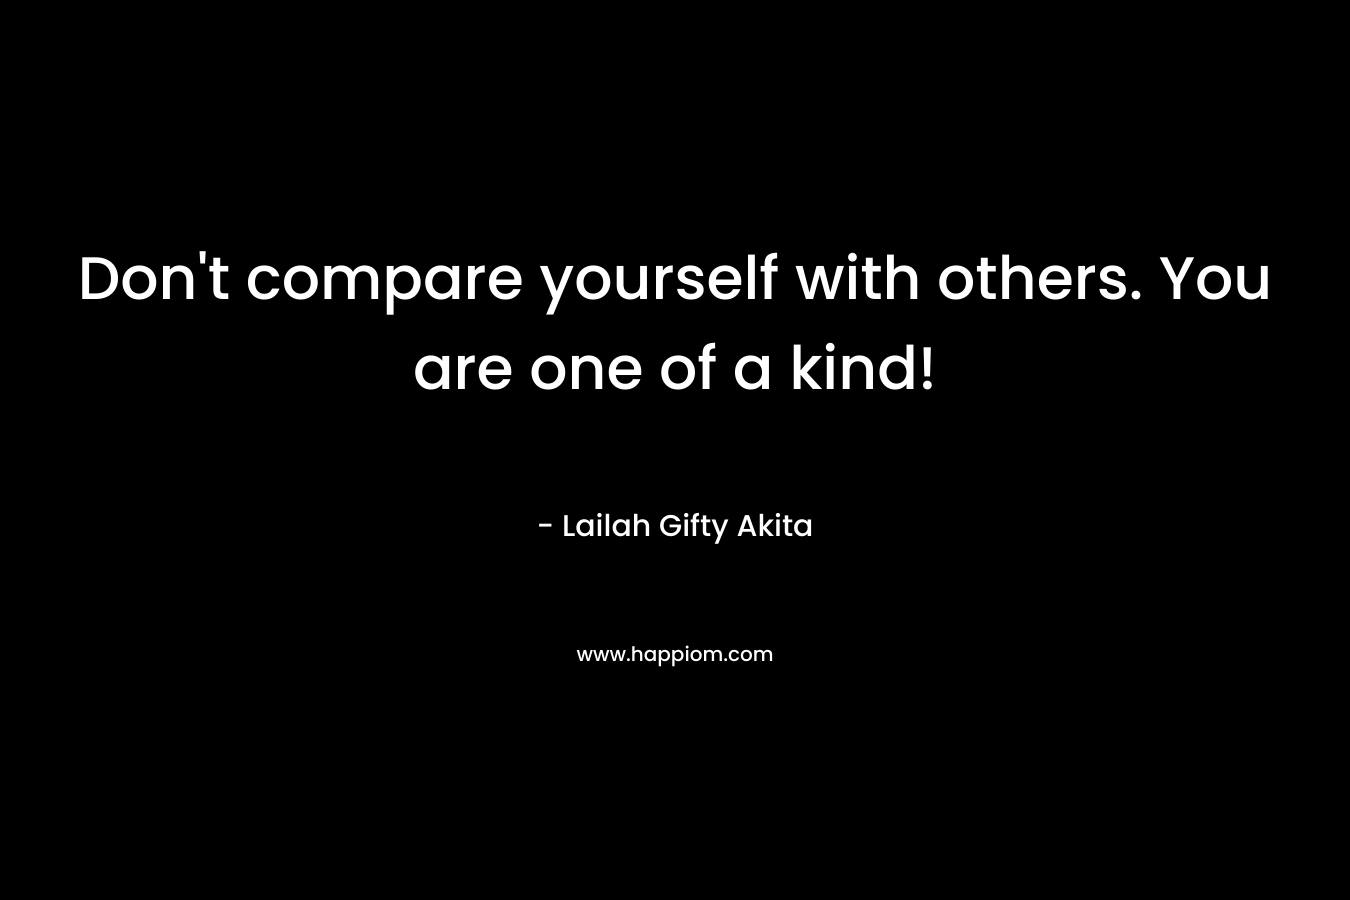 Don't compare yourself with others. You are one of a kind!